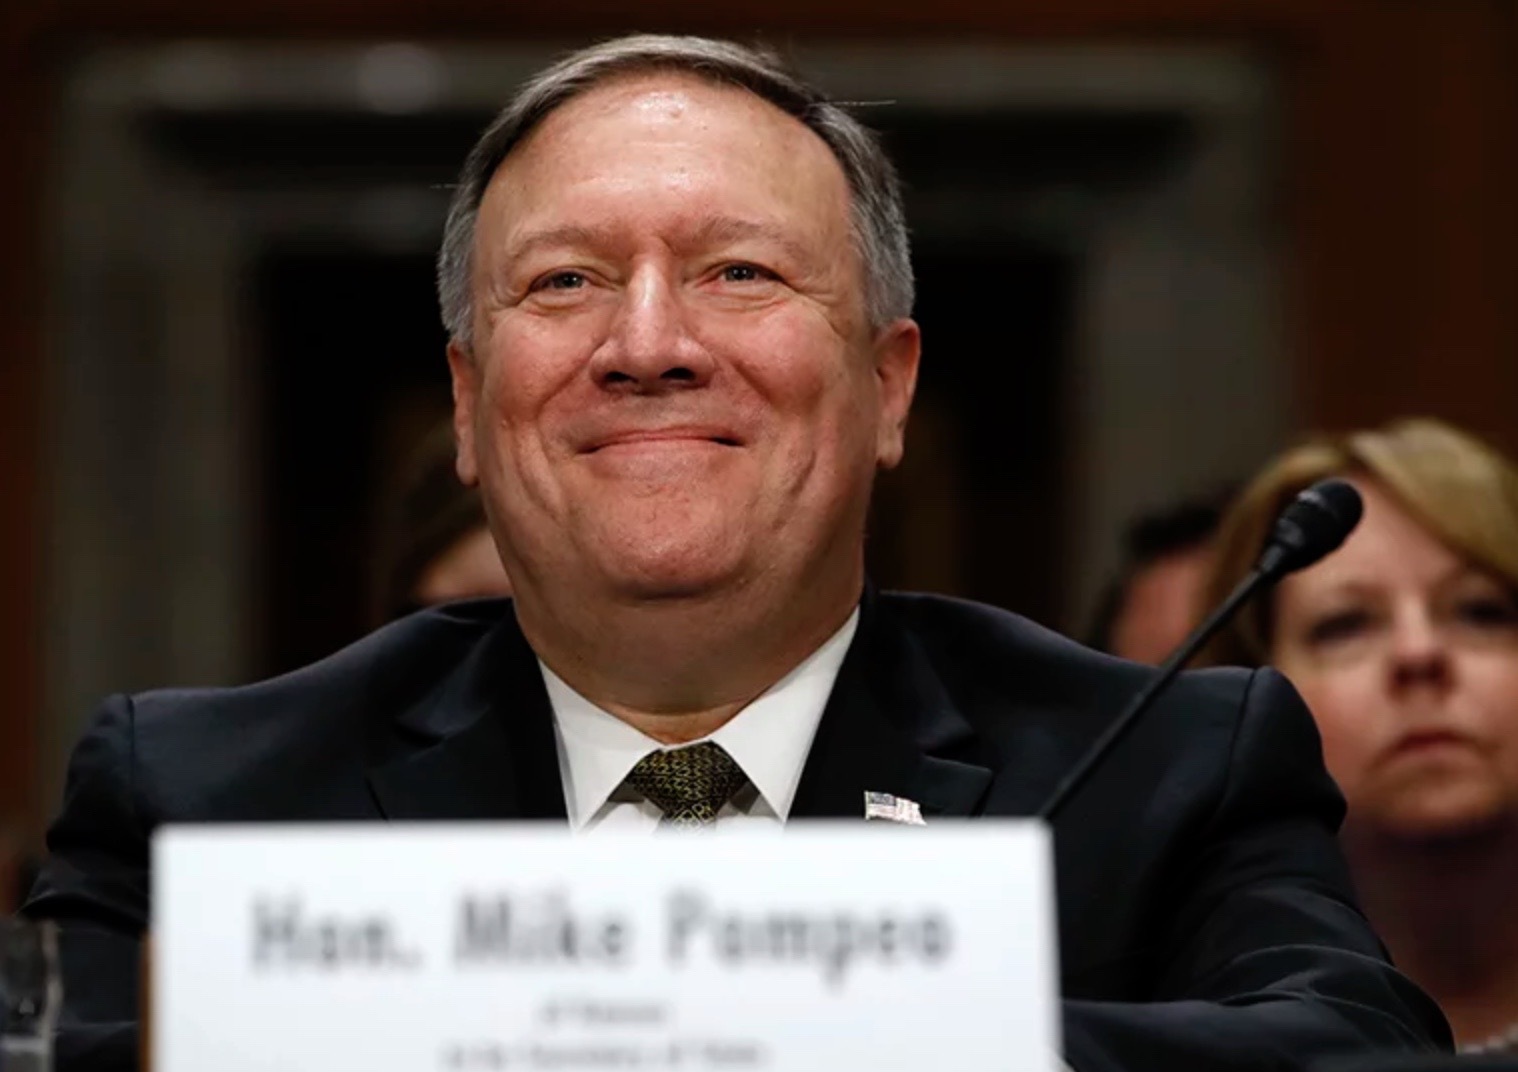 Muslims Find Jews Standing Behind Them In Opposition To Pompeo’s Confirmation